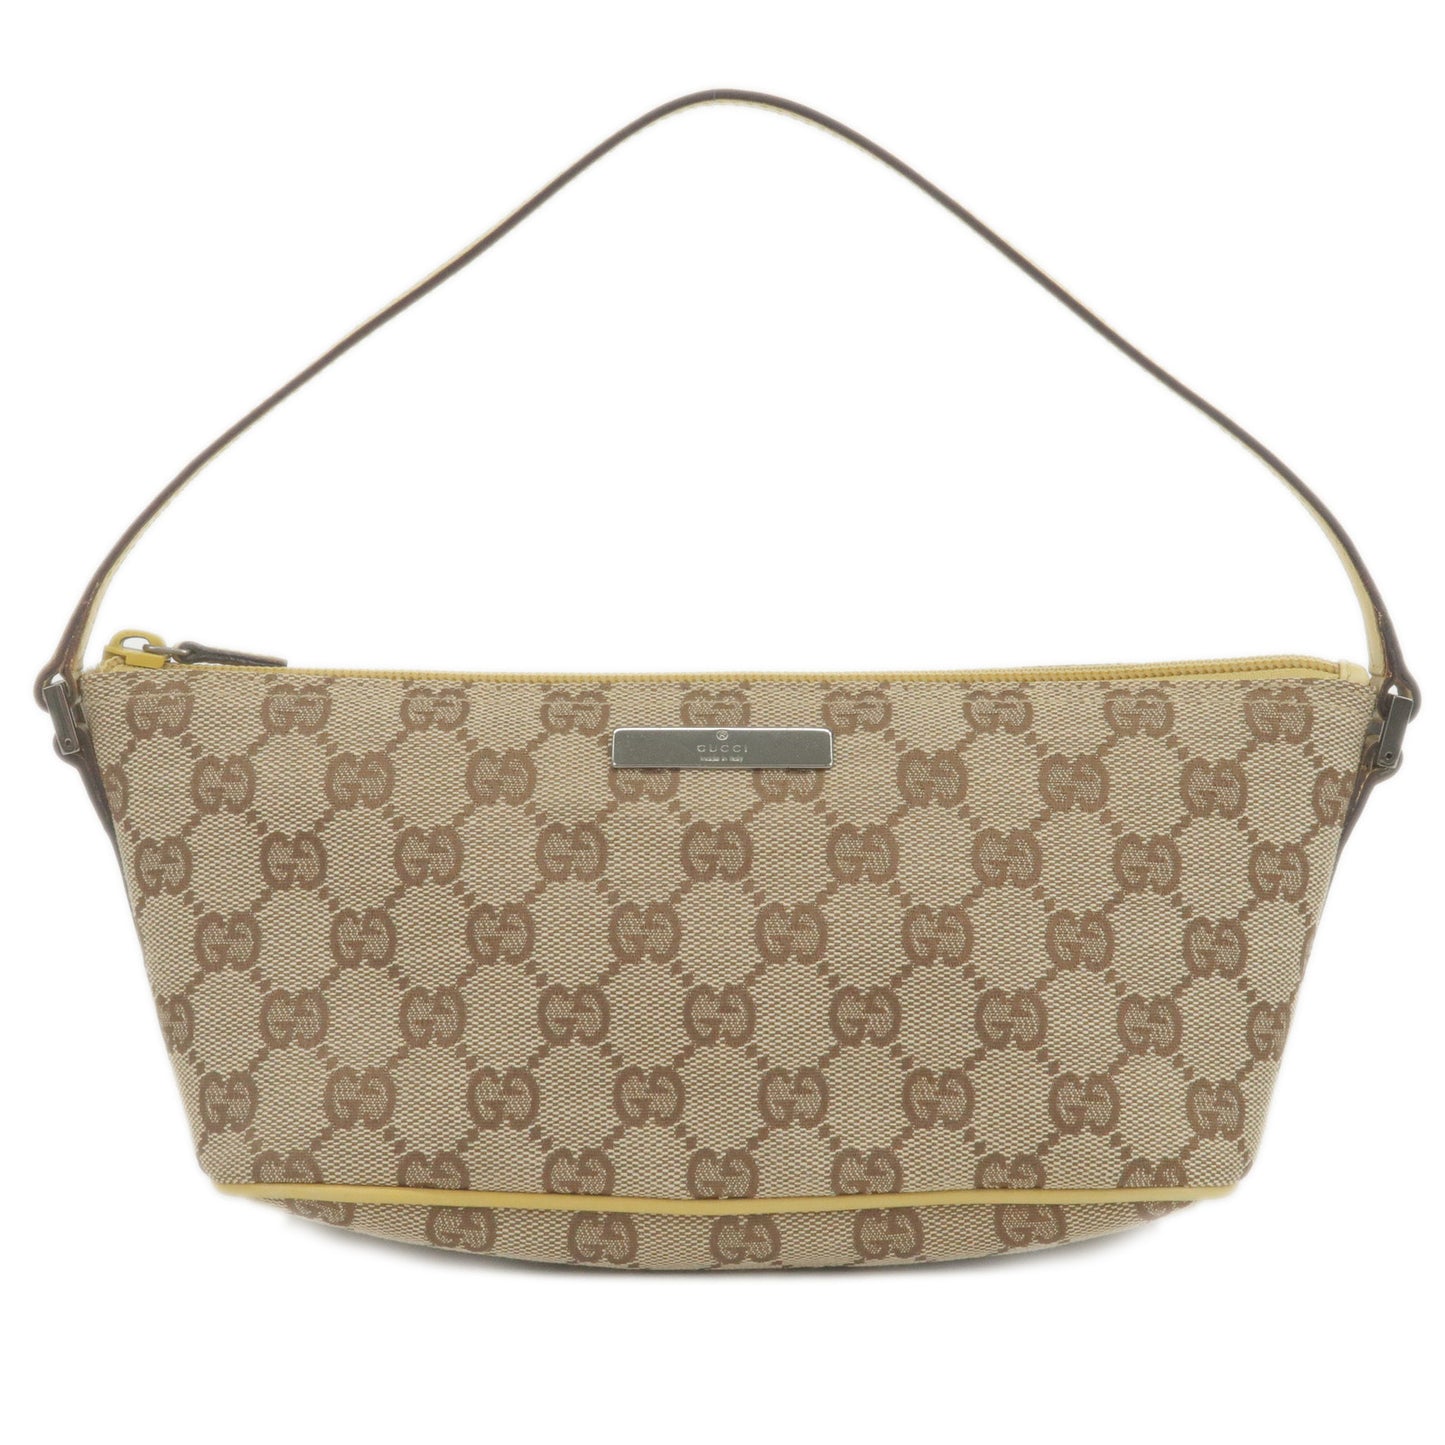 GUCCI-GG-Canvas-Leather-Boat-Bag-Hand-Bag-Beige-Yellow-07198